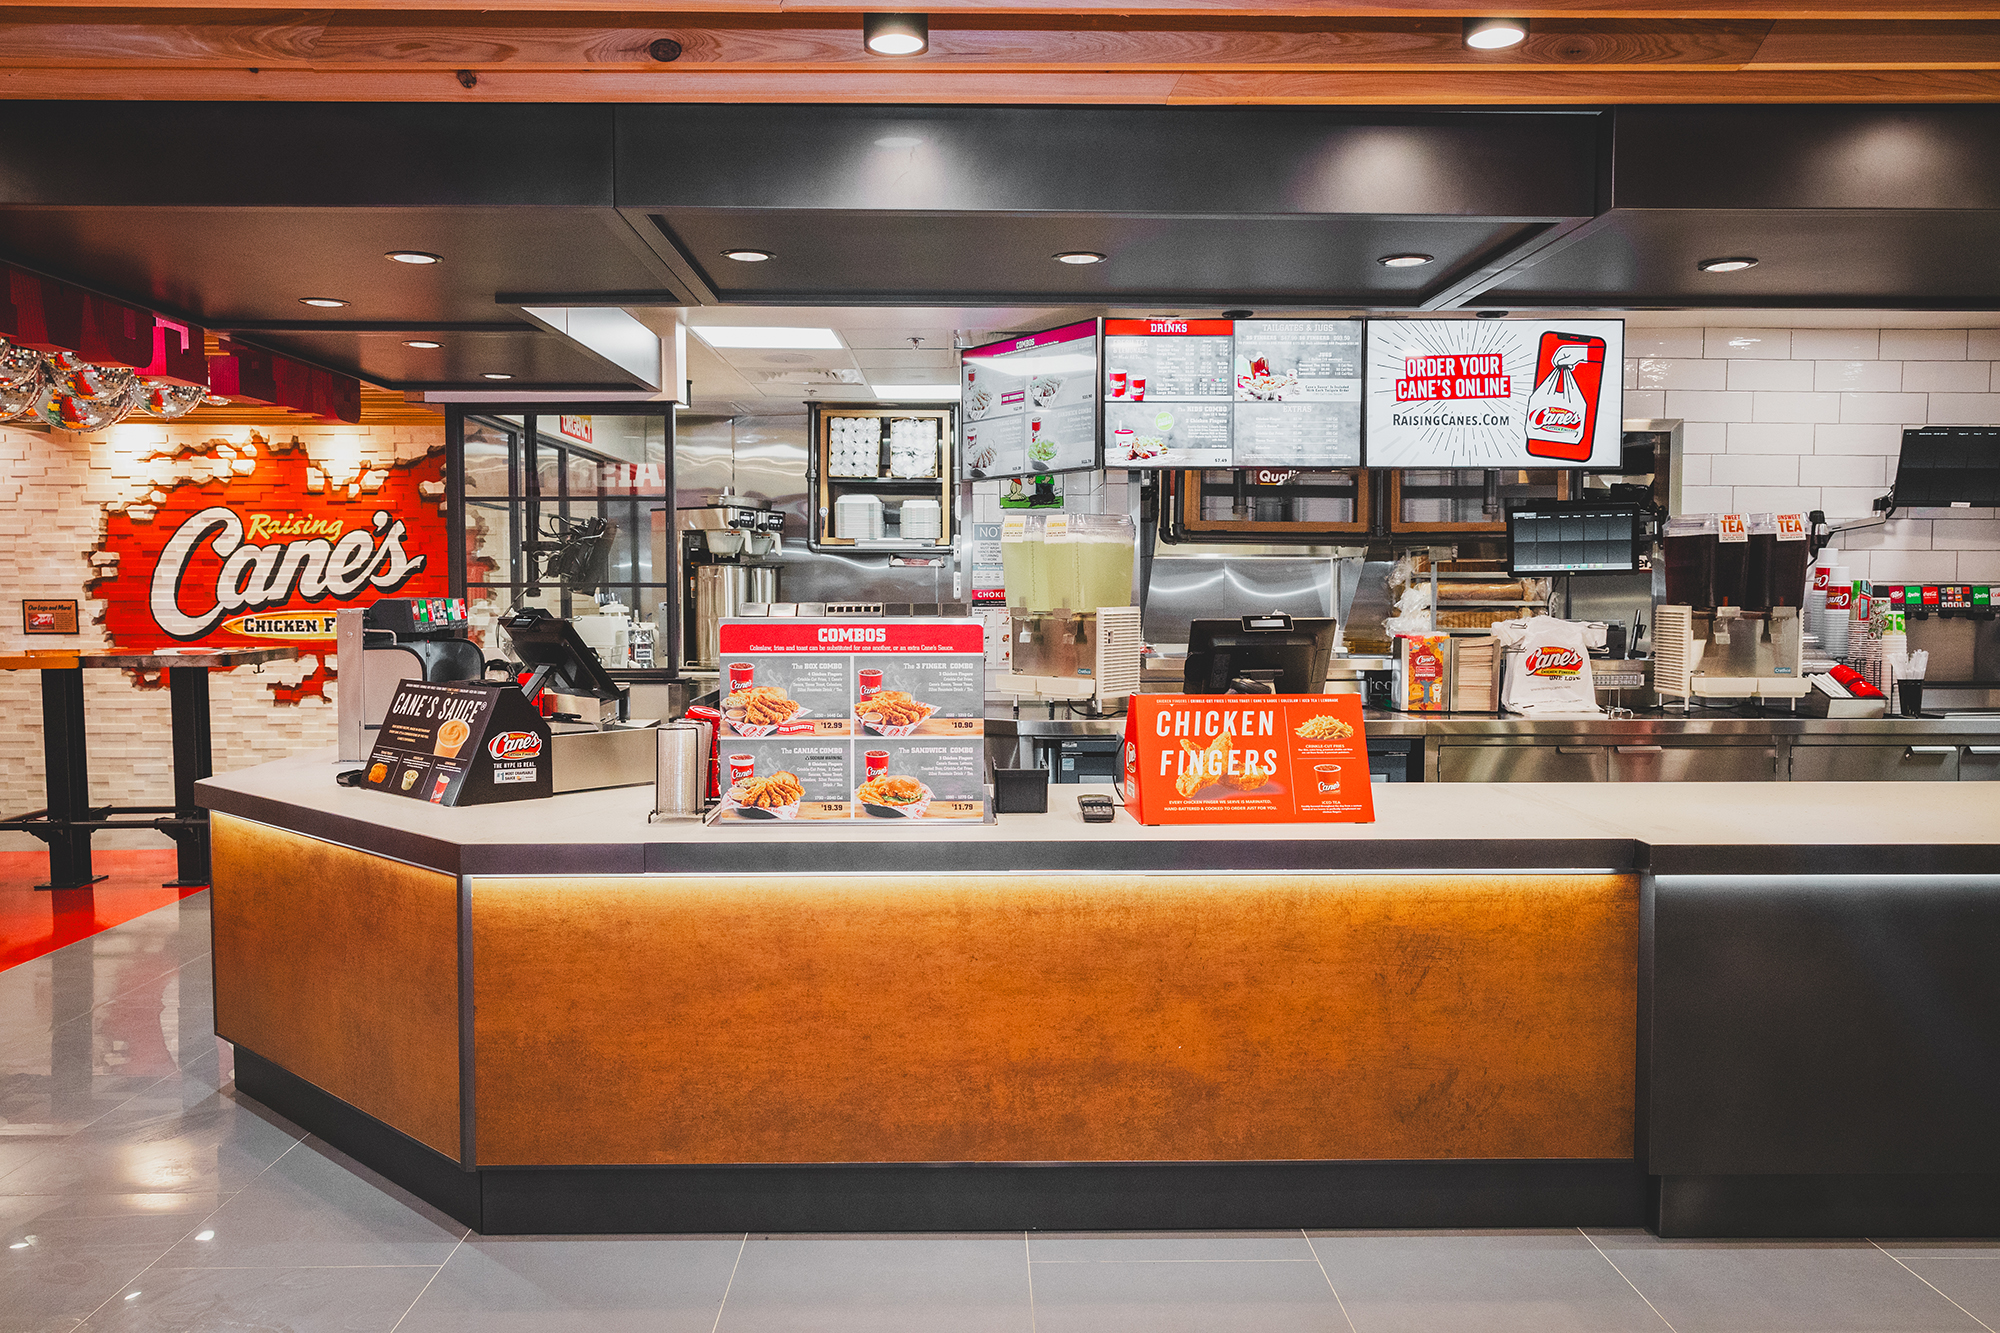 The brand new Raising Cane's Union Station location